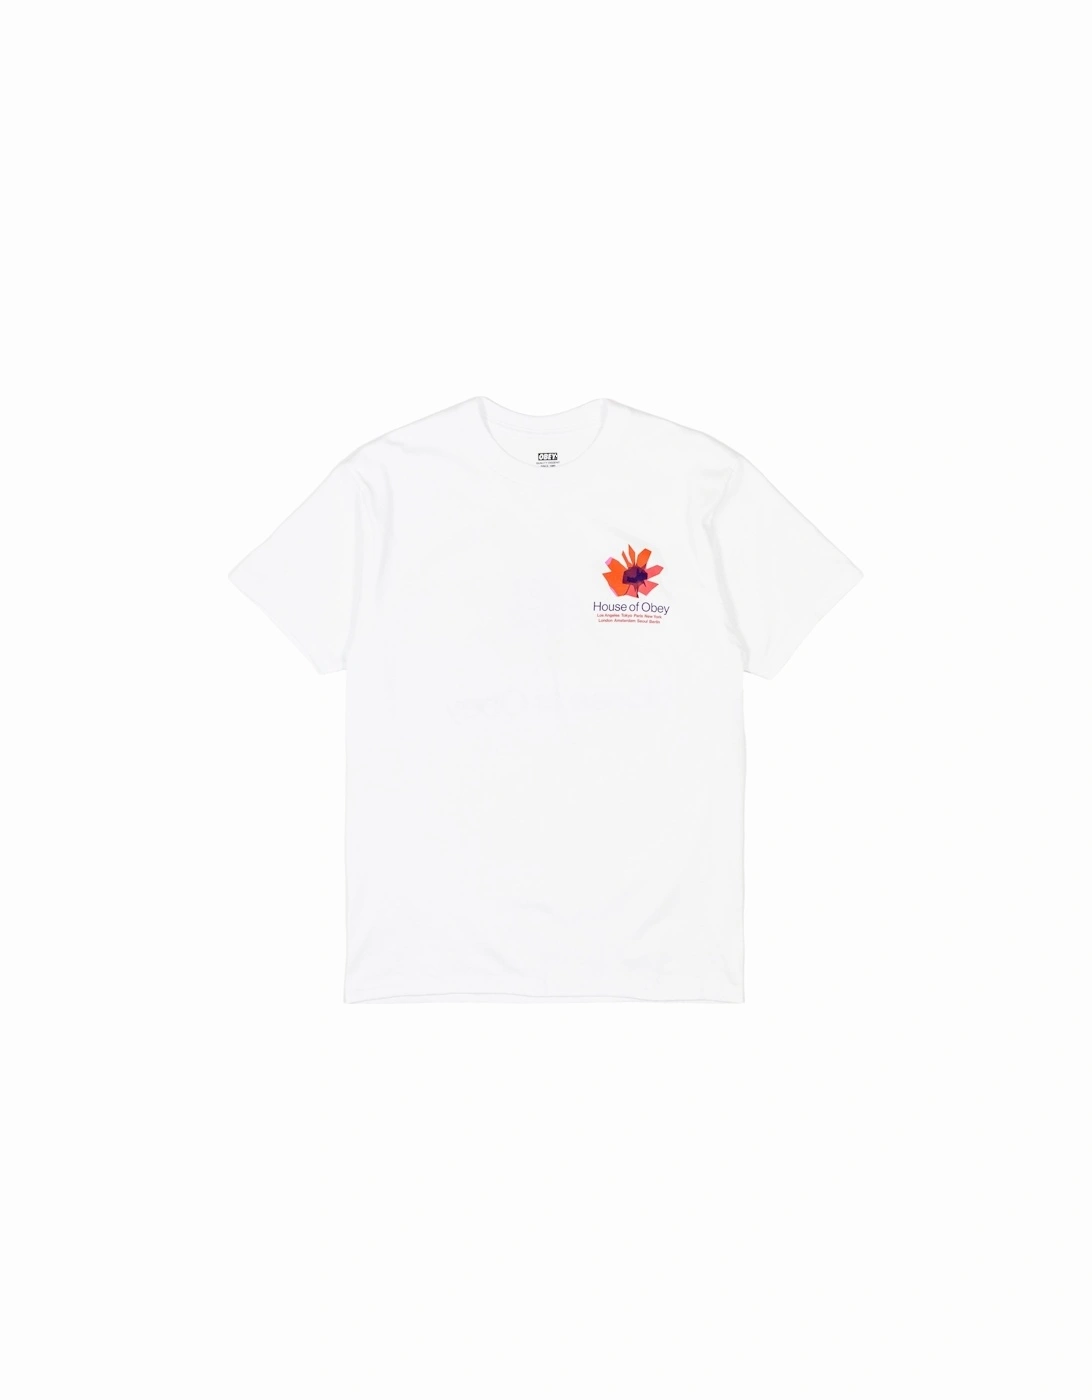 House of Floral T-Shirt - White